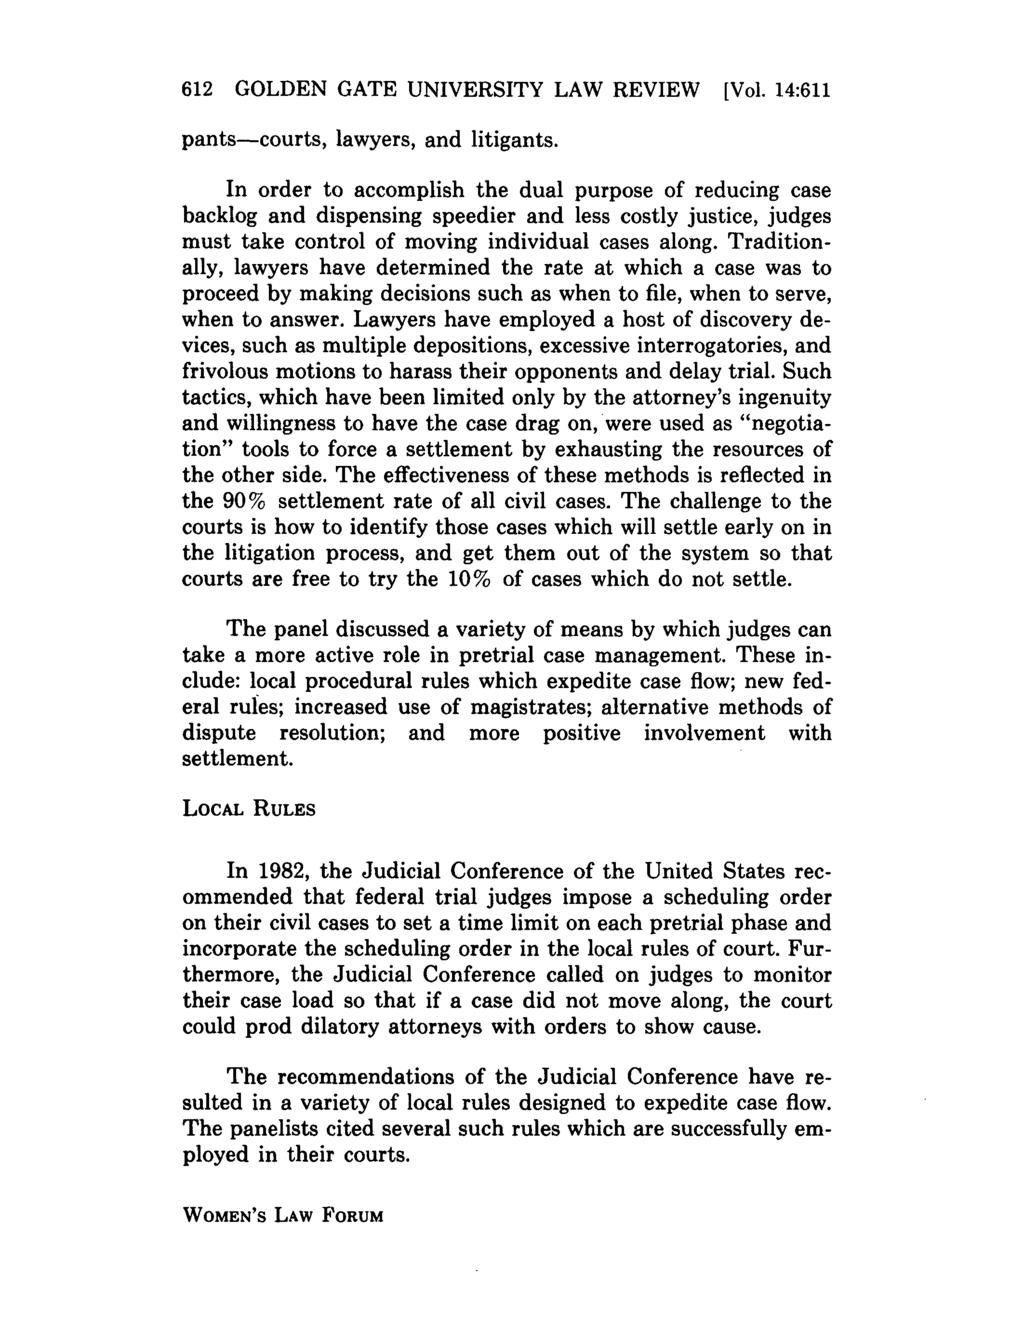 Golden Gate University Law Review, Vol. 14, Iss. 3 [1984], Art. 8 612 GOLDEN GATE UNIVERSITY LAW REVIEW [Vol. 14:611 pants-courts, lawyers, and litigants.